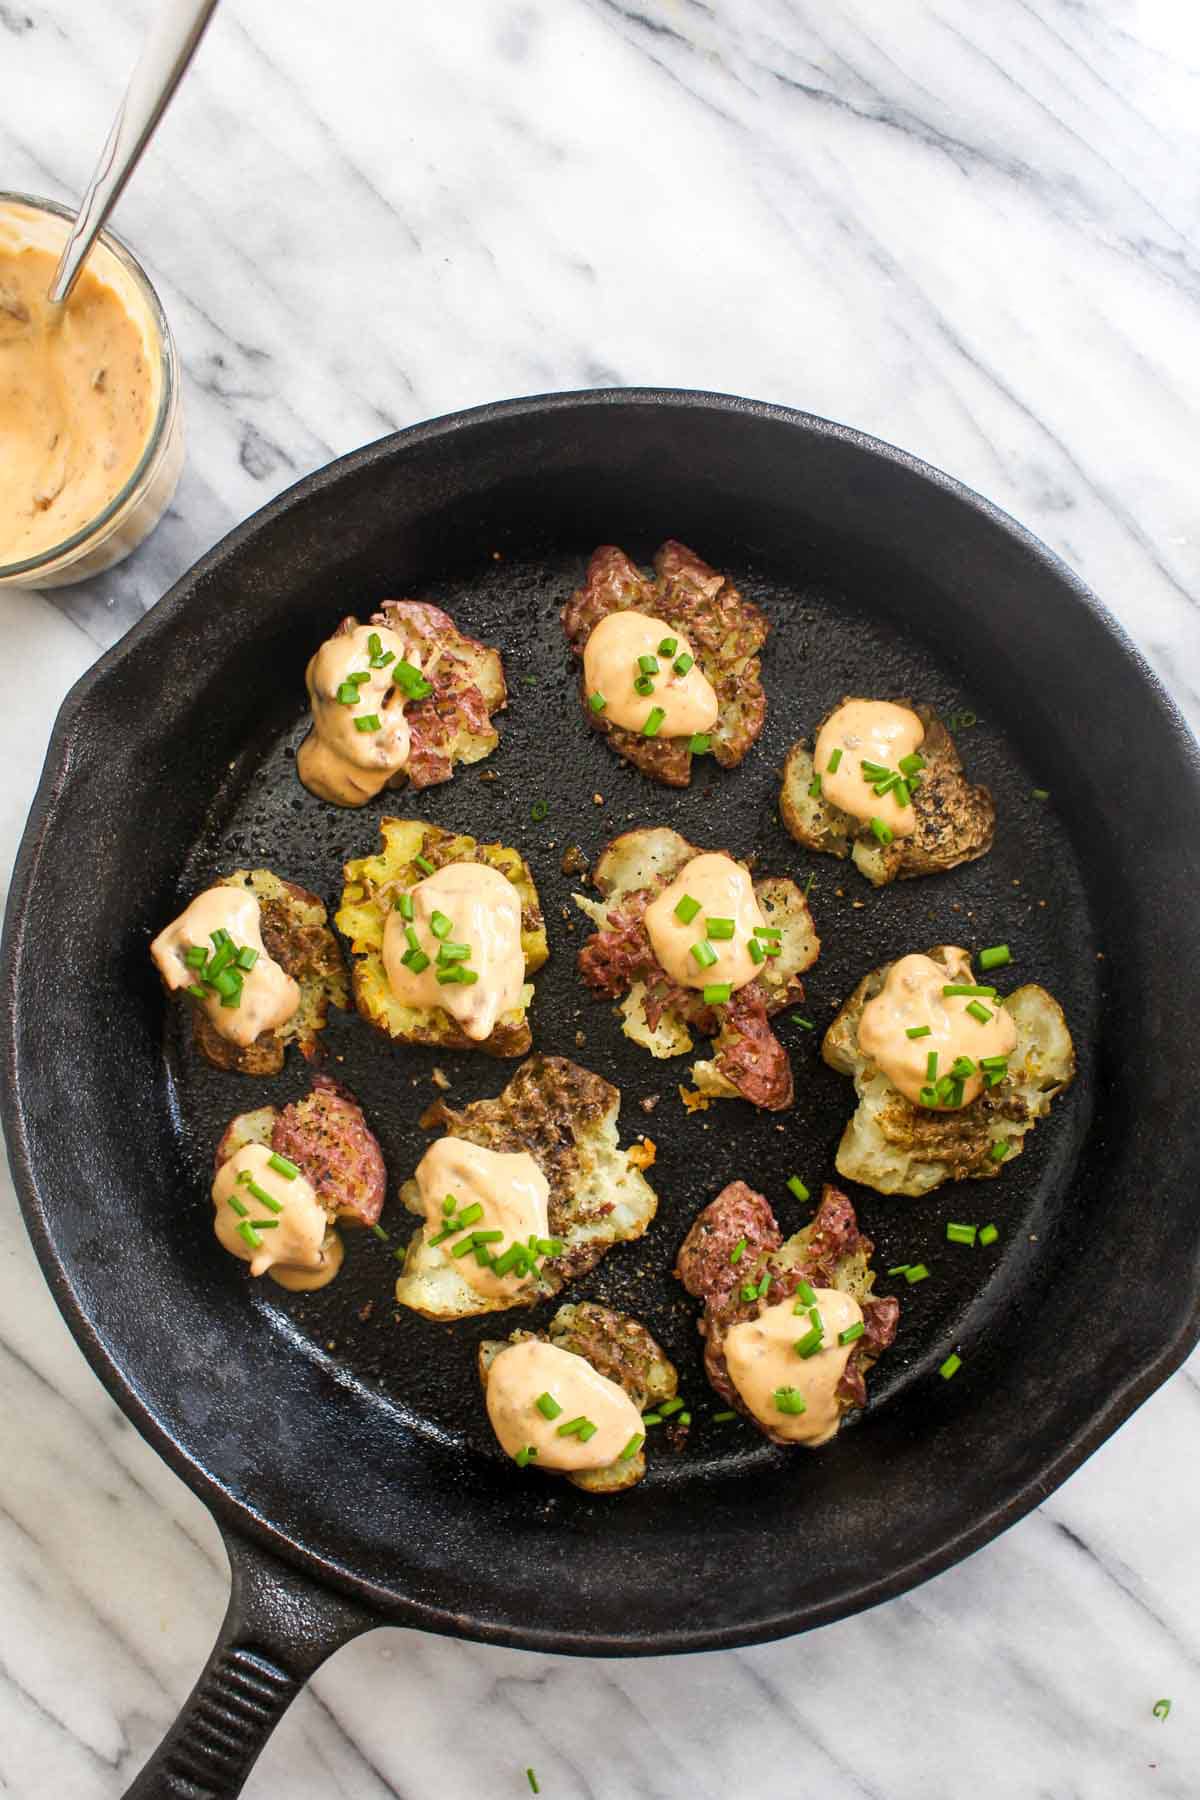 Smashed Potatoes with Chipotle Aioli are an easy 4 ingredient side recipe. Smashing the potatoes before roasting means more of those perfect crispy edges. This side is perfect for dinner or Thanksgiving! Grain-free and vegan, this is a Holiday crowd pleaser that everyone can enjoy! | CatchingSeeds.com